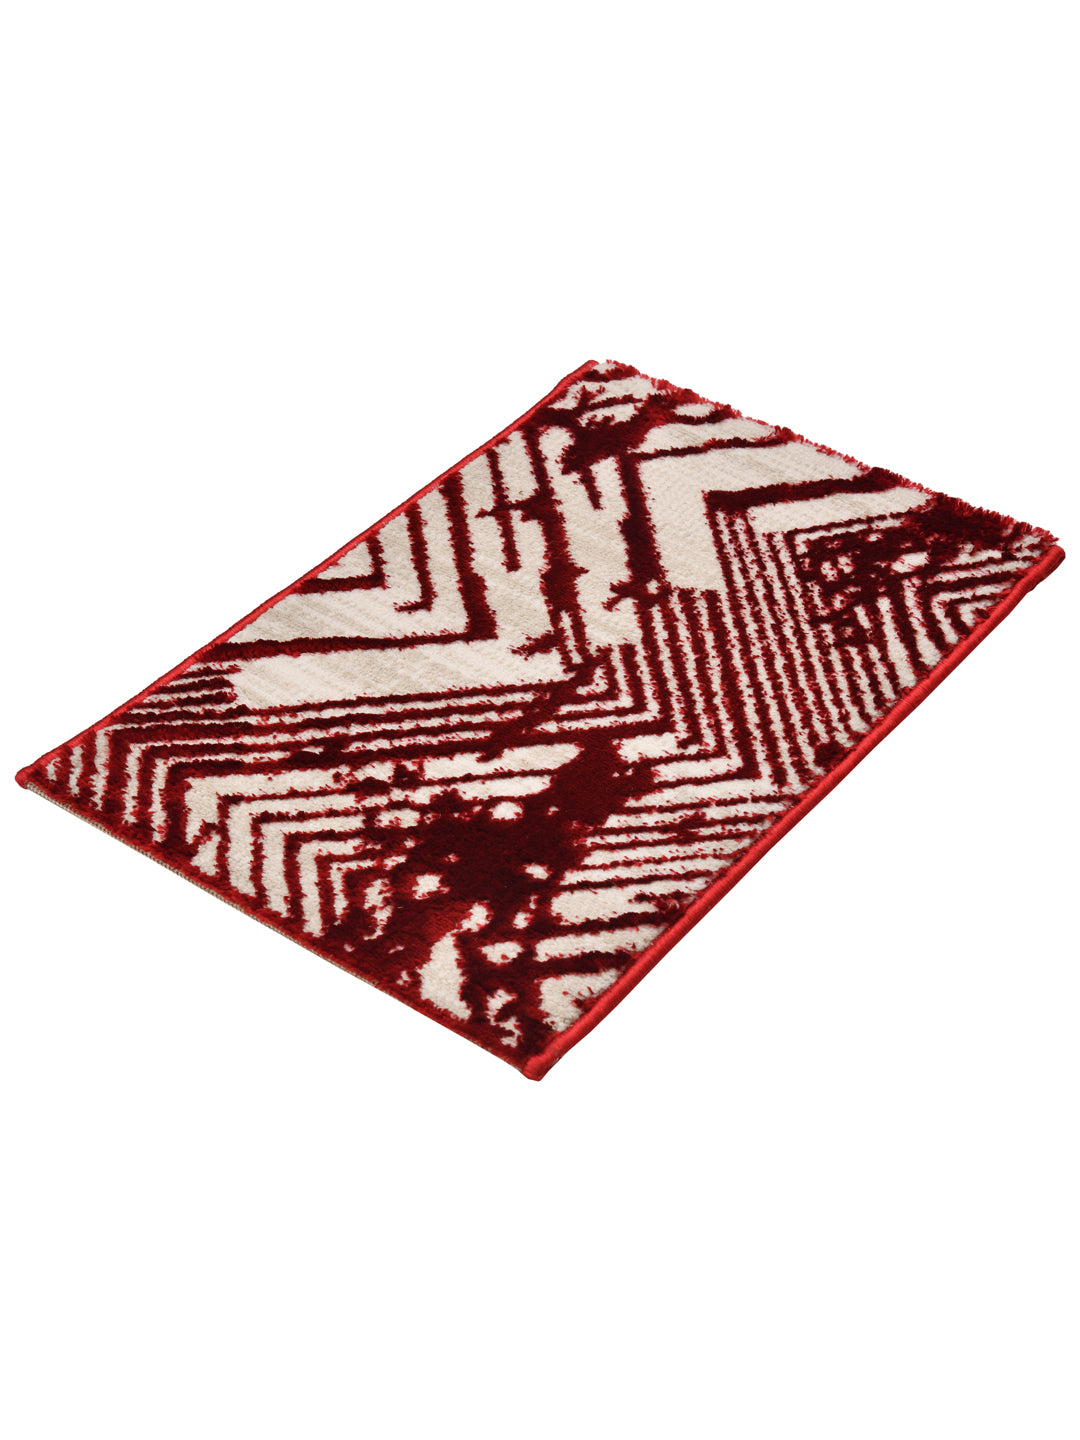 Doormat With Anti Skid Backing; 16x24 Inches; Maroon Beige Abstract